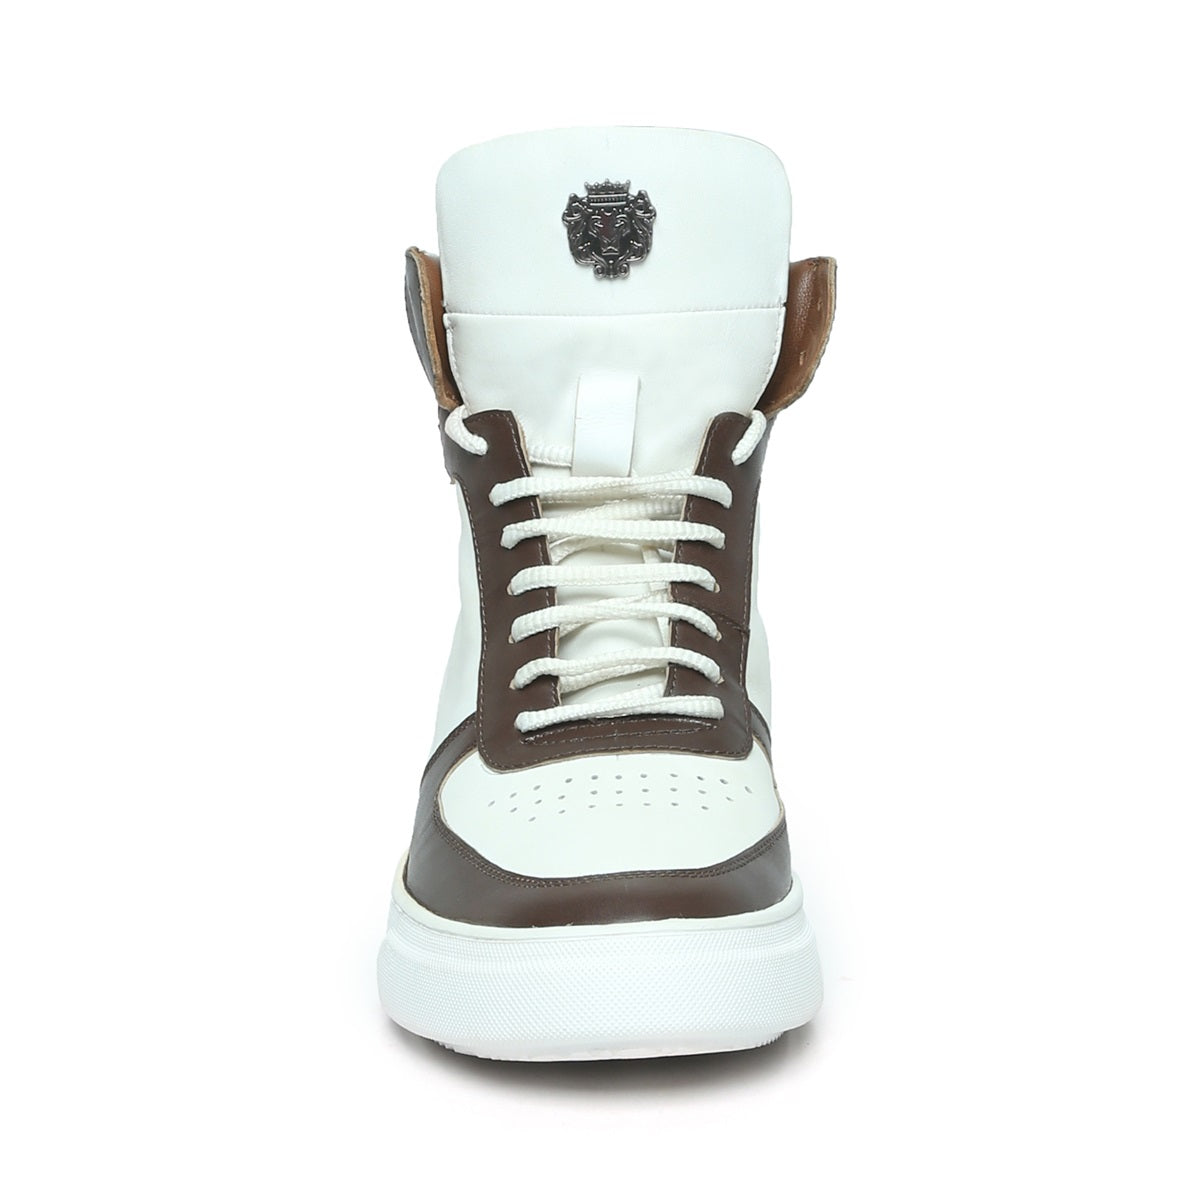 Contrasting Brown & Tan Leather Sneakers White High Ankle by Brune & B